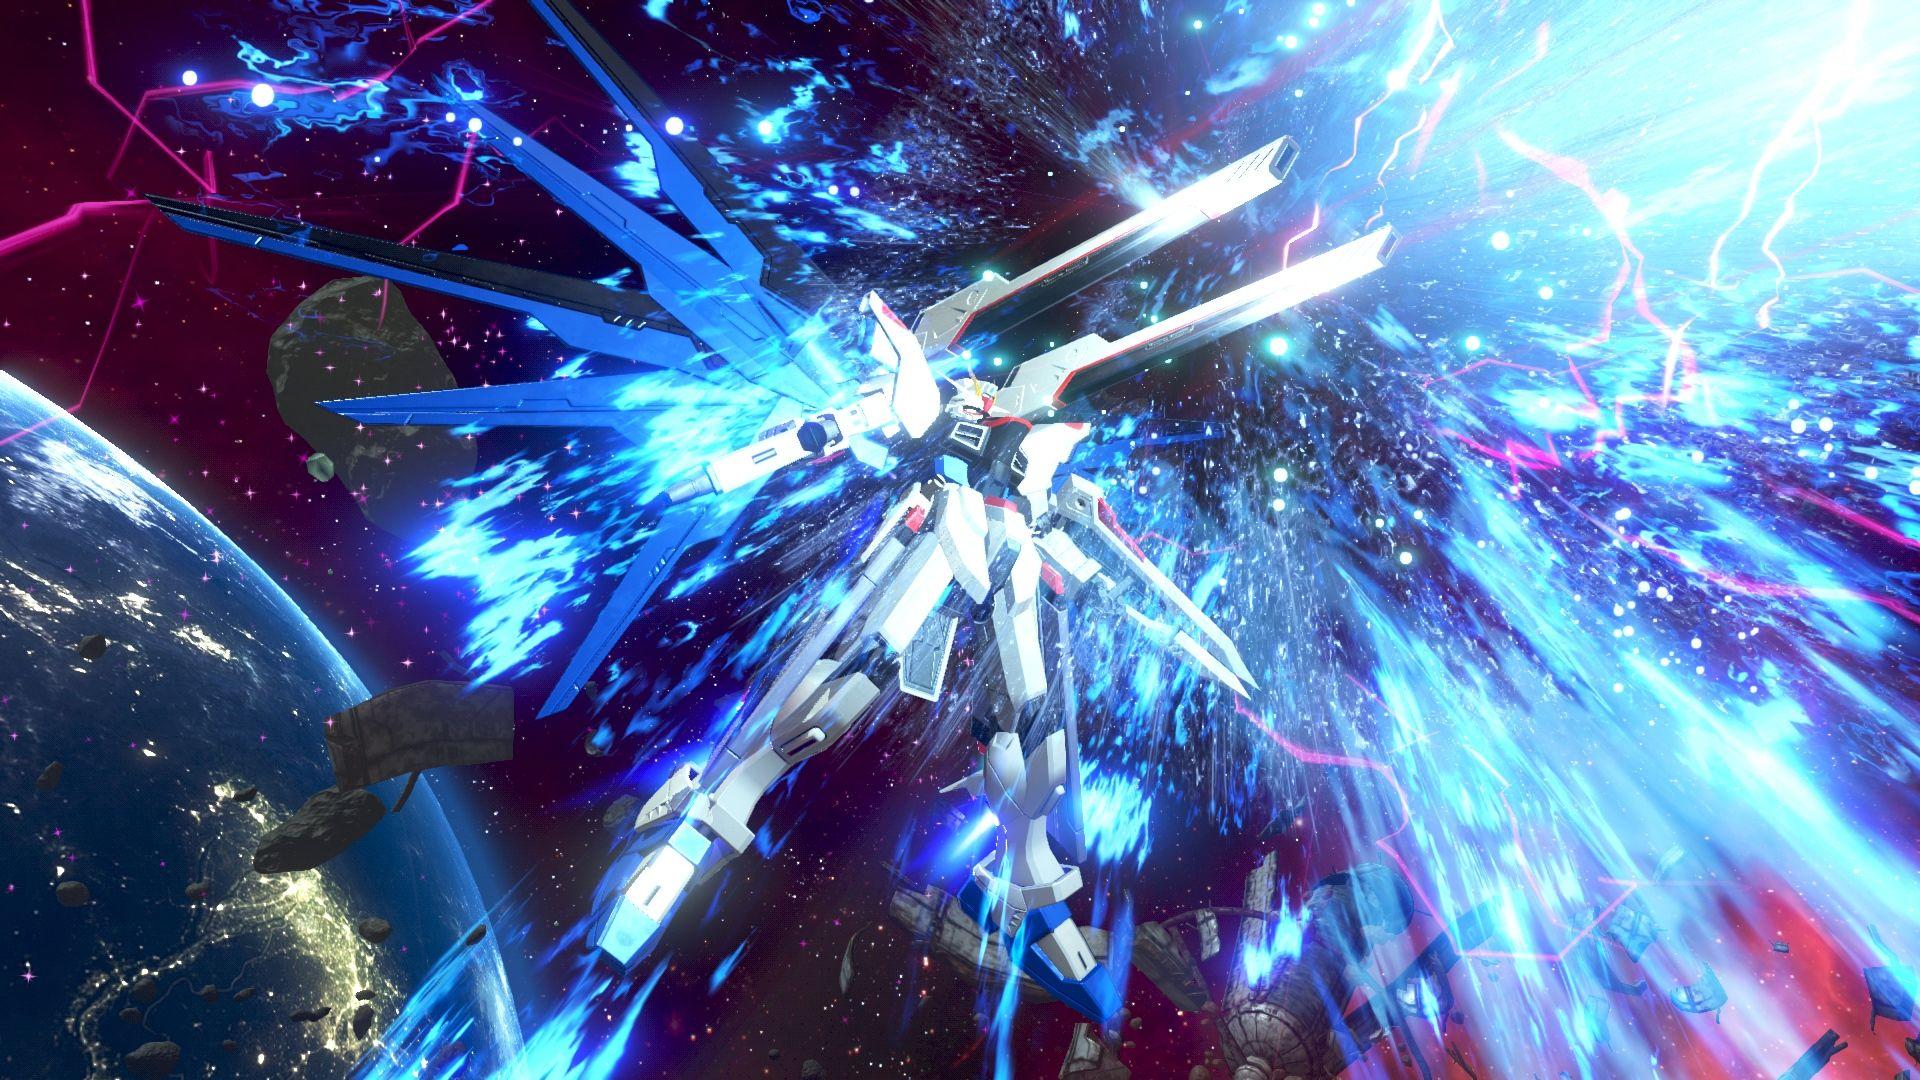 Awesome Gundam Versus PlayStation 4 (PS4) Game 1920x1080 wallpaper